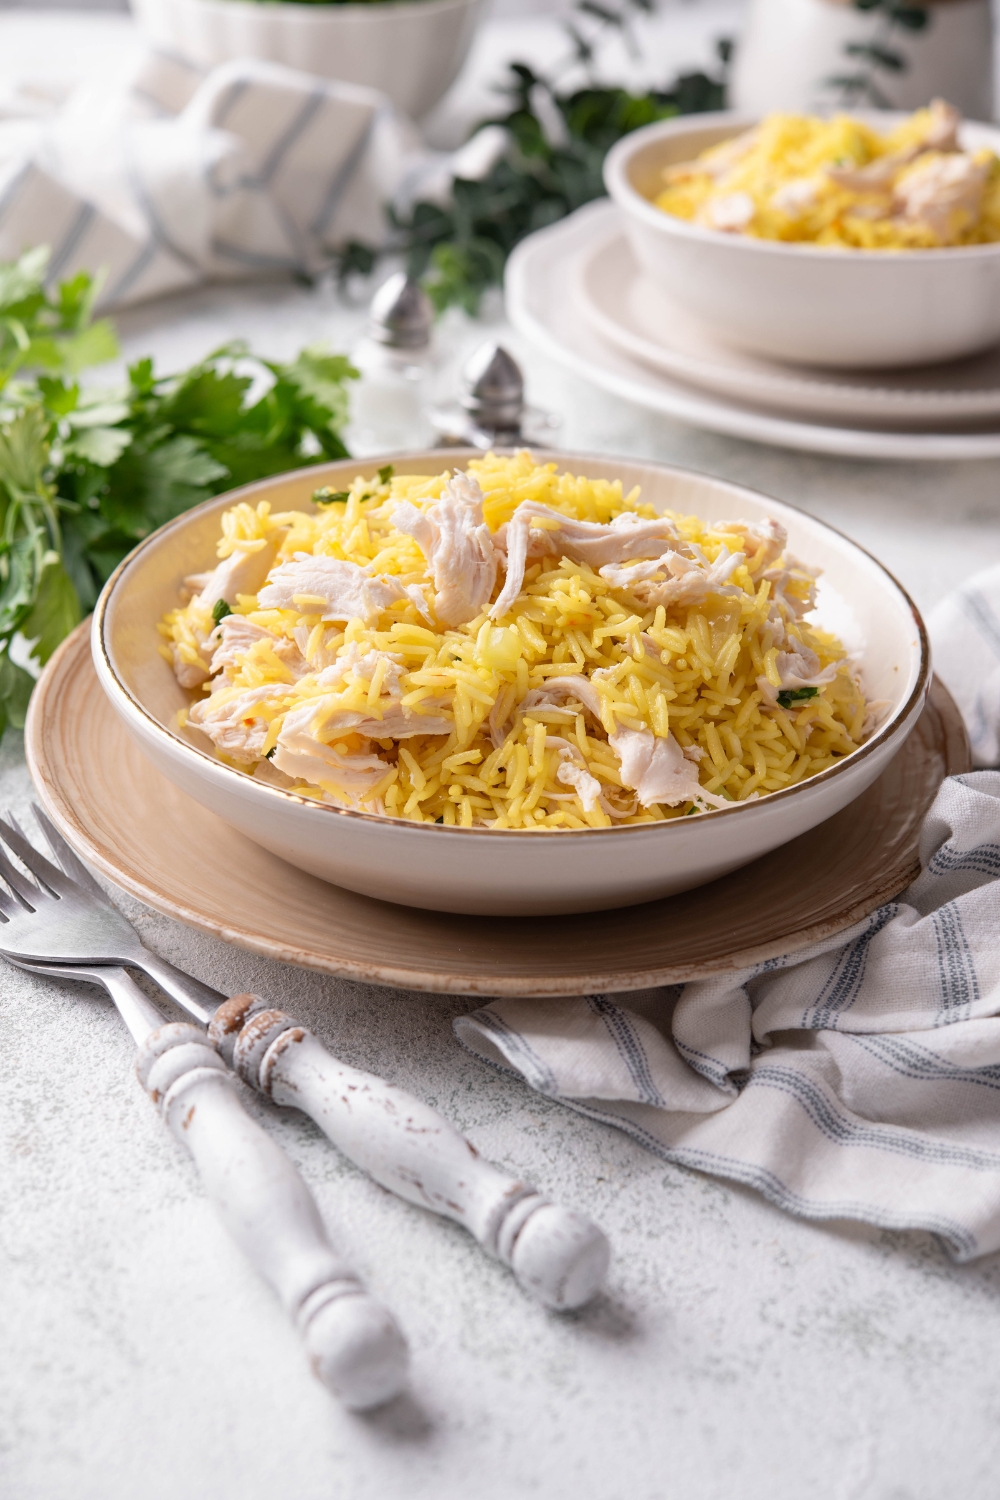 A bowl filled with yellow rice and cooked shredded chicken mixed together beside a set of silverware.